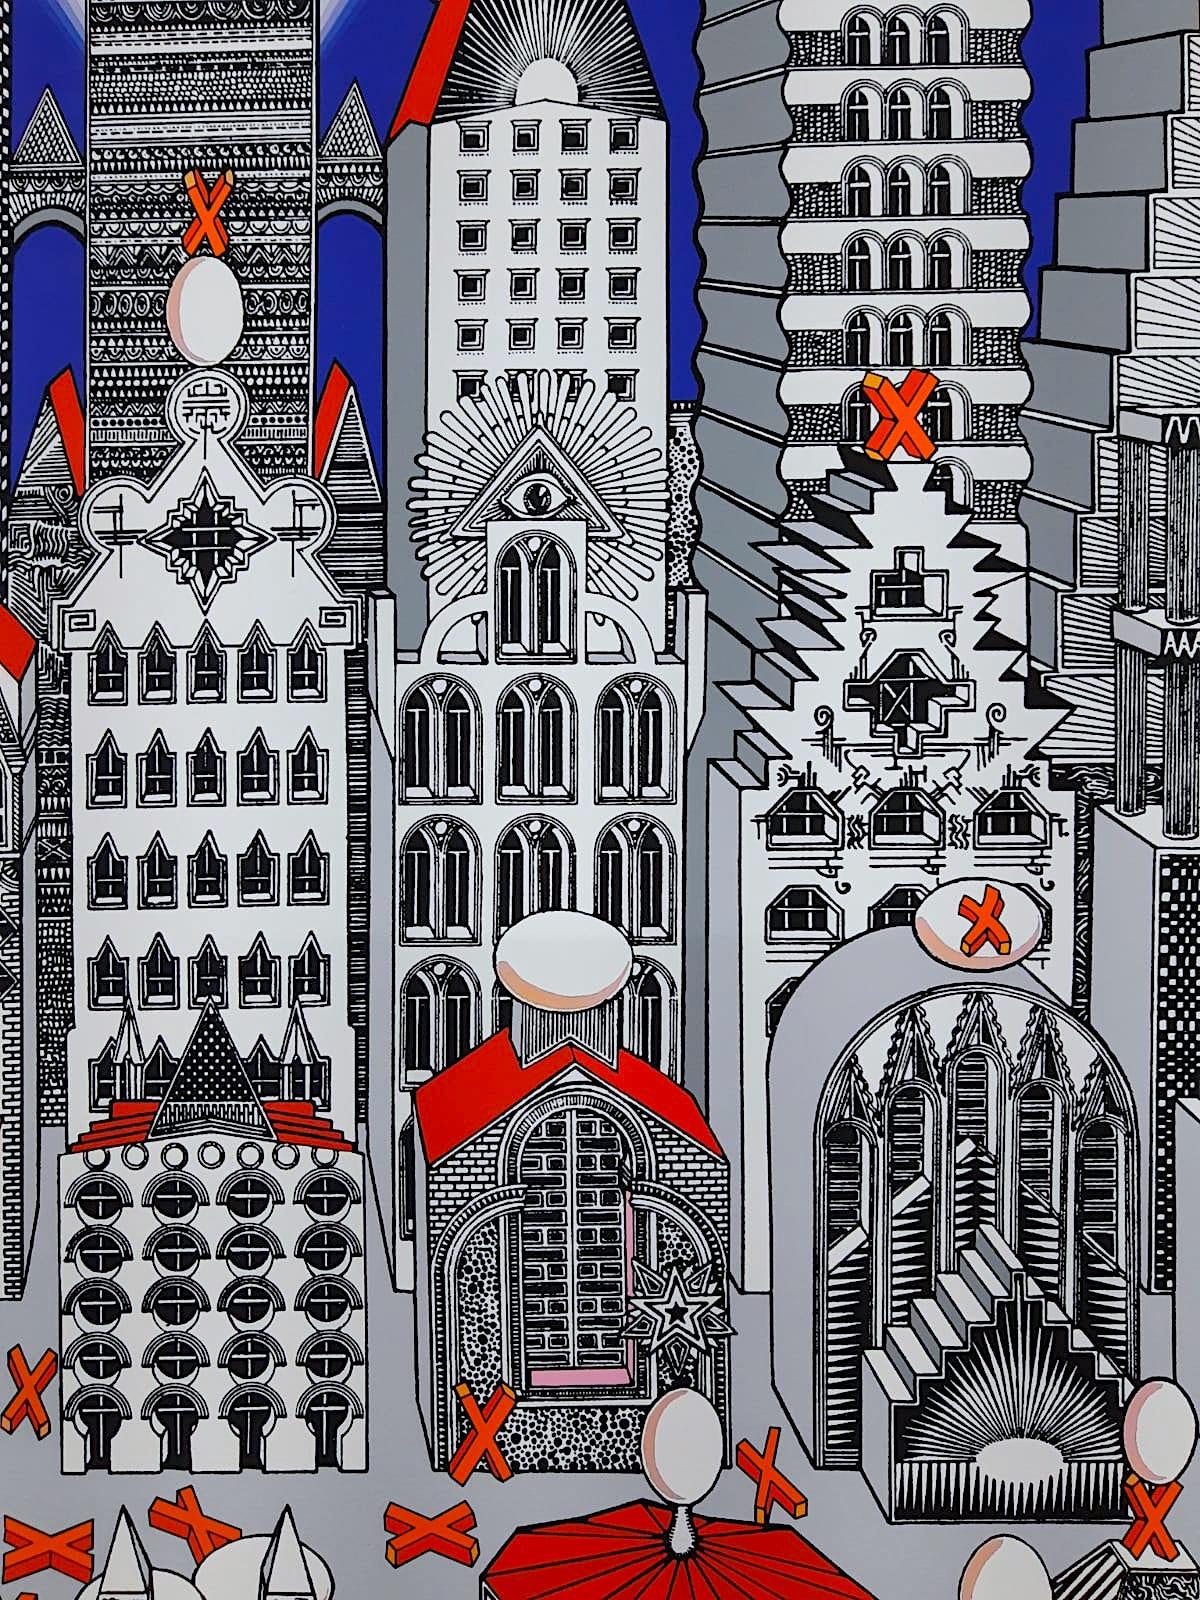 City of a million with 25 boiled eggs - Print by Pedro Friedeberg